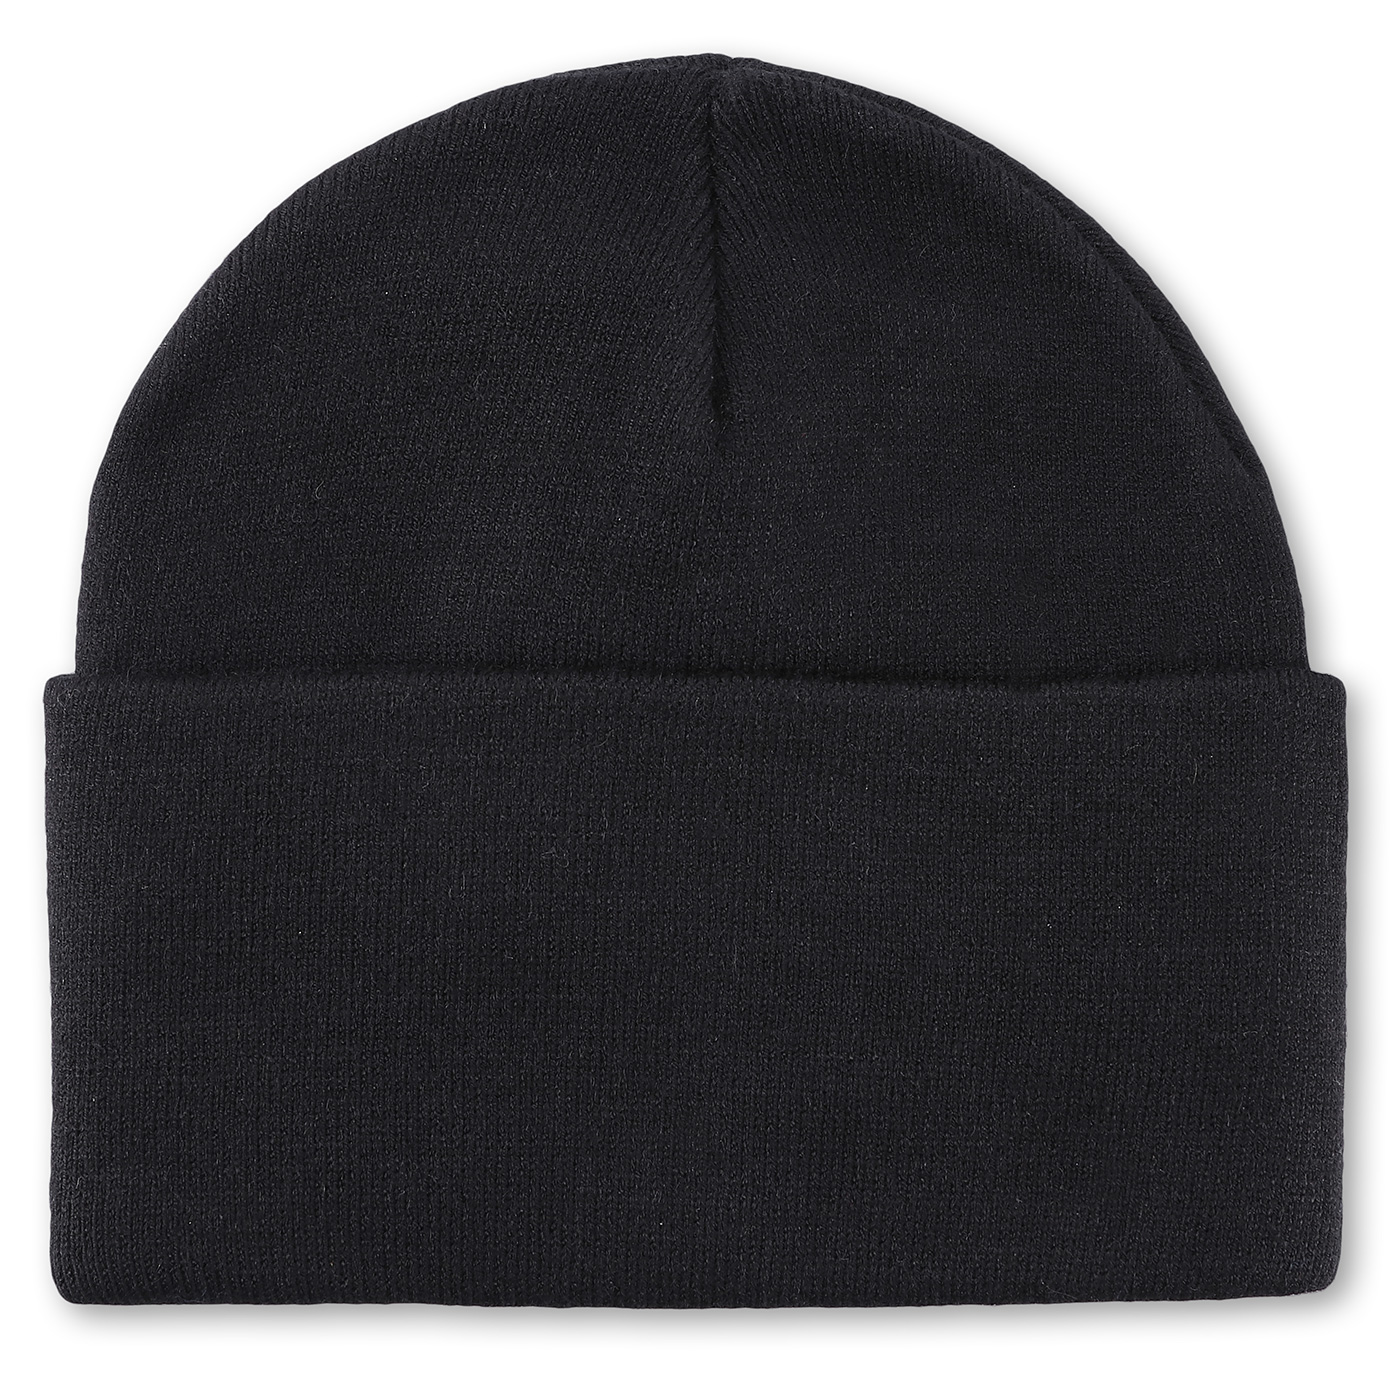 Image IM BEANIE WITH MATCHING EMBROIDERED LOGO - 1 